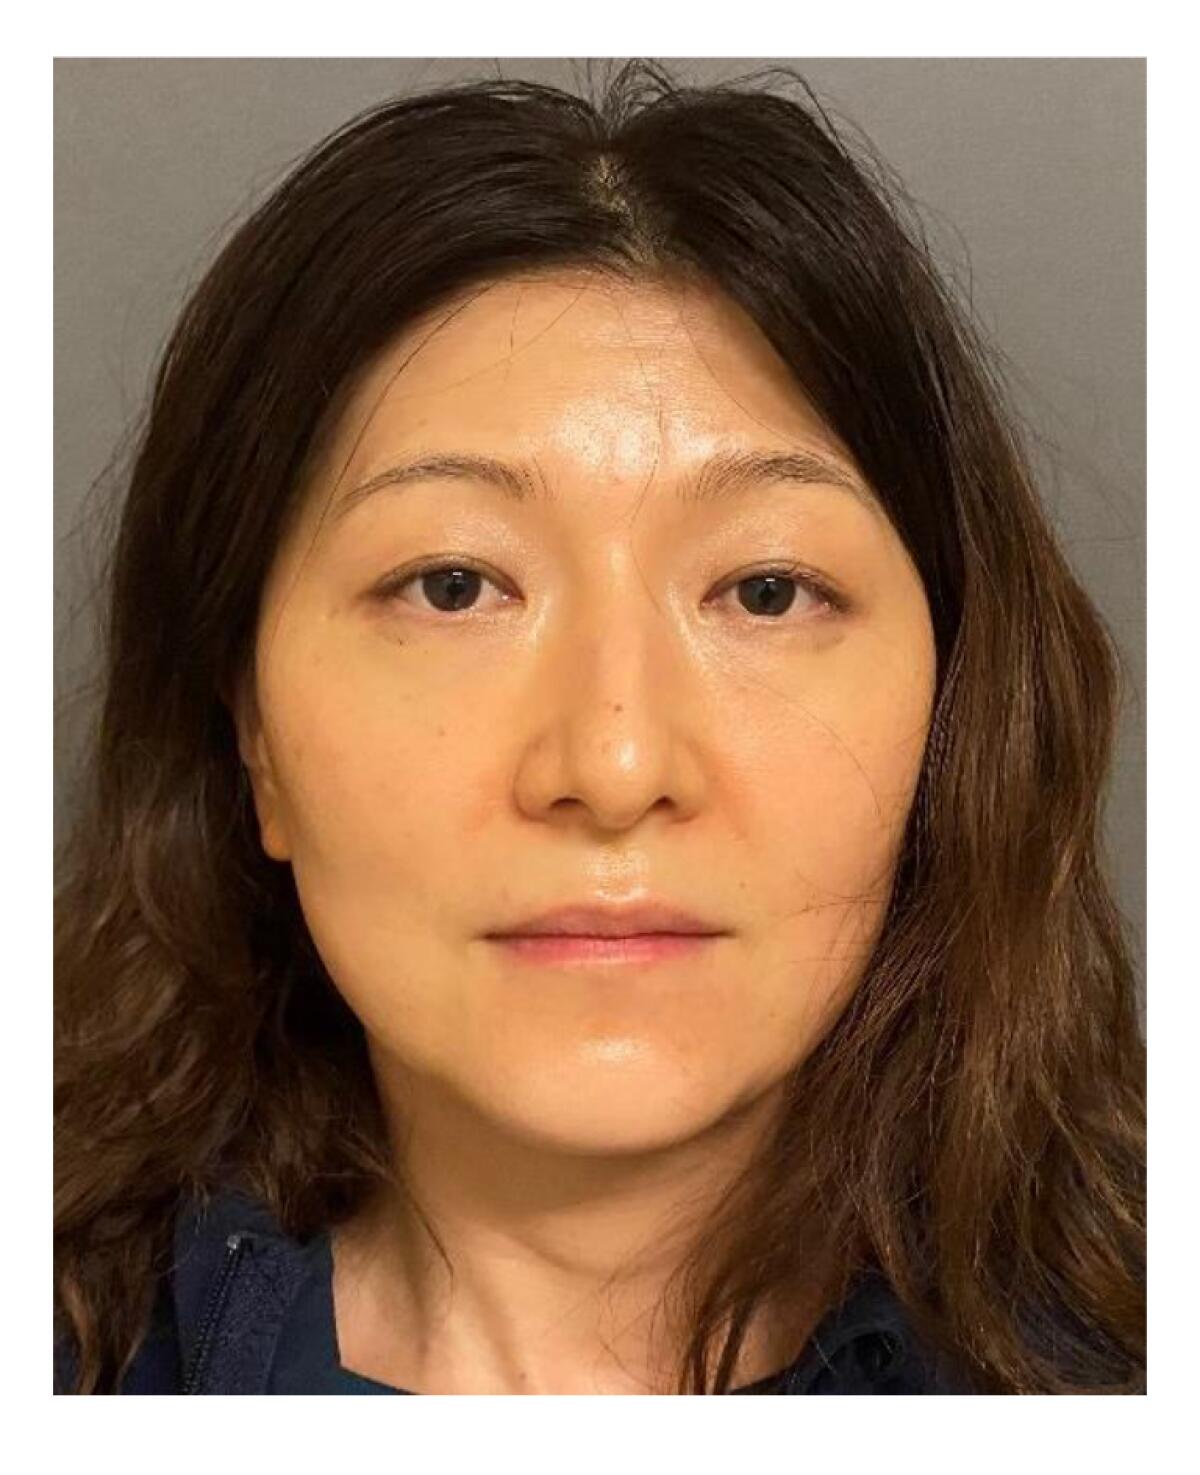 Irvine police arrested 45-year-old Yue "Emily" Yu in August on suspicion of poisoning her husband.